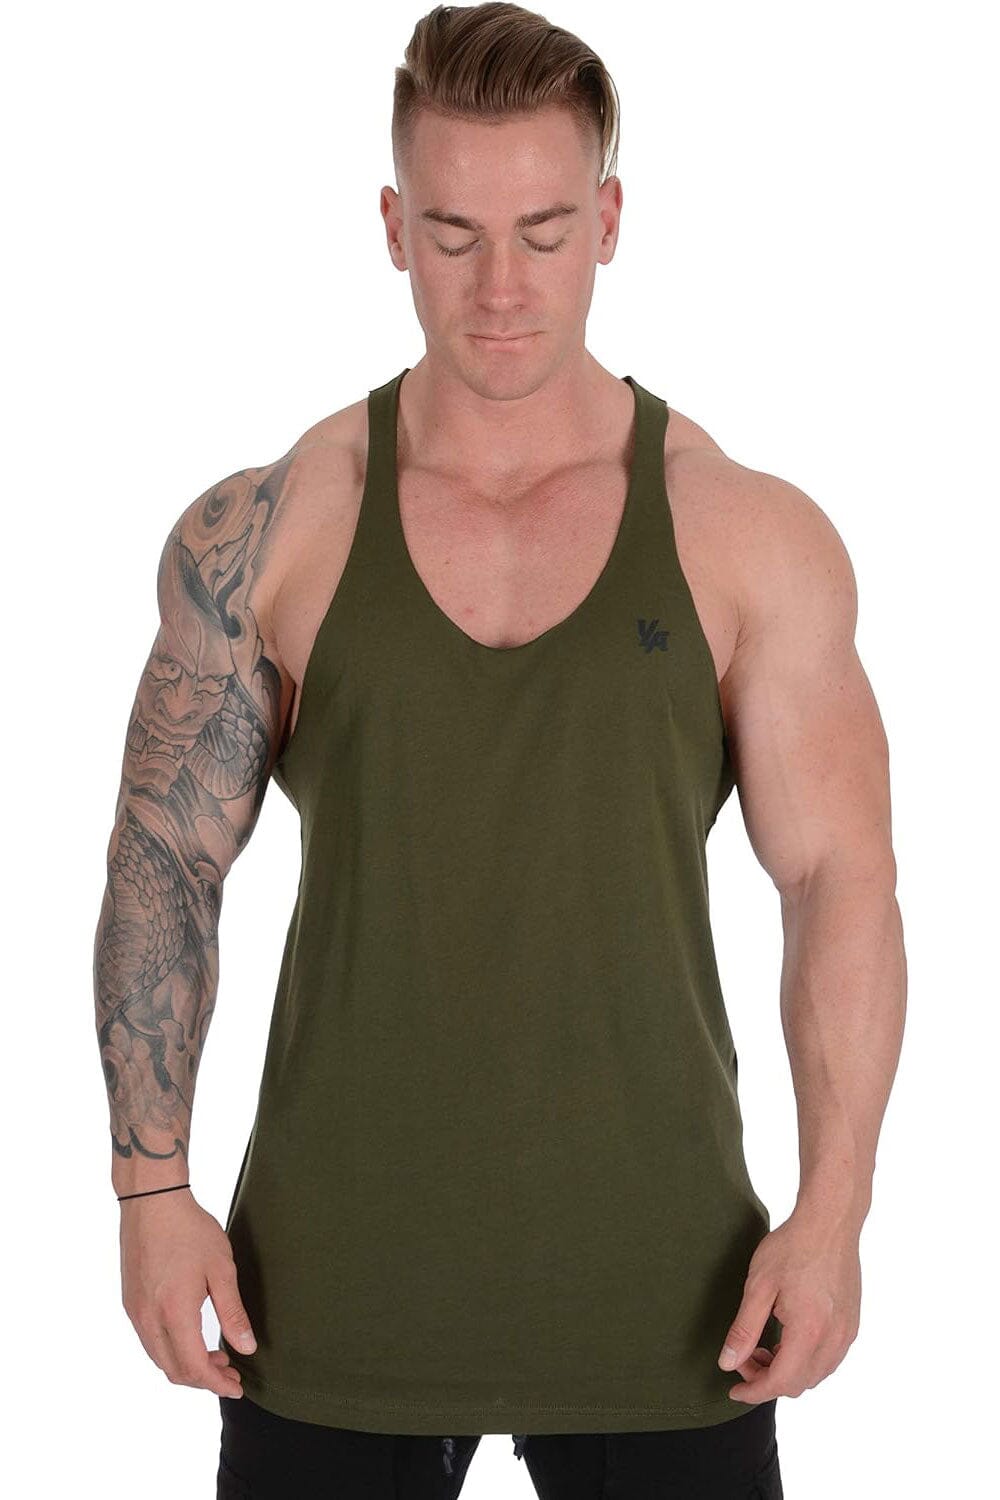 YoungLA Excellent Tanks, Men's Fashion, Activewear on Carousell